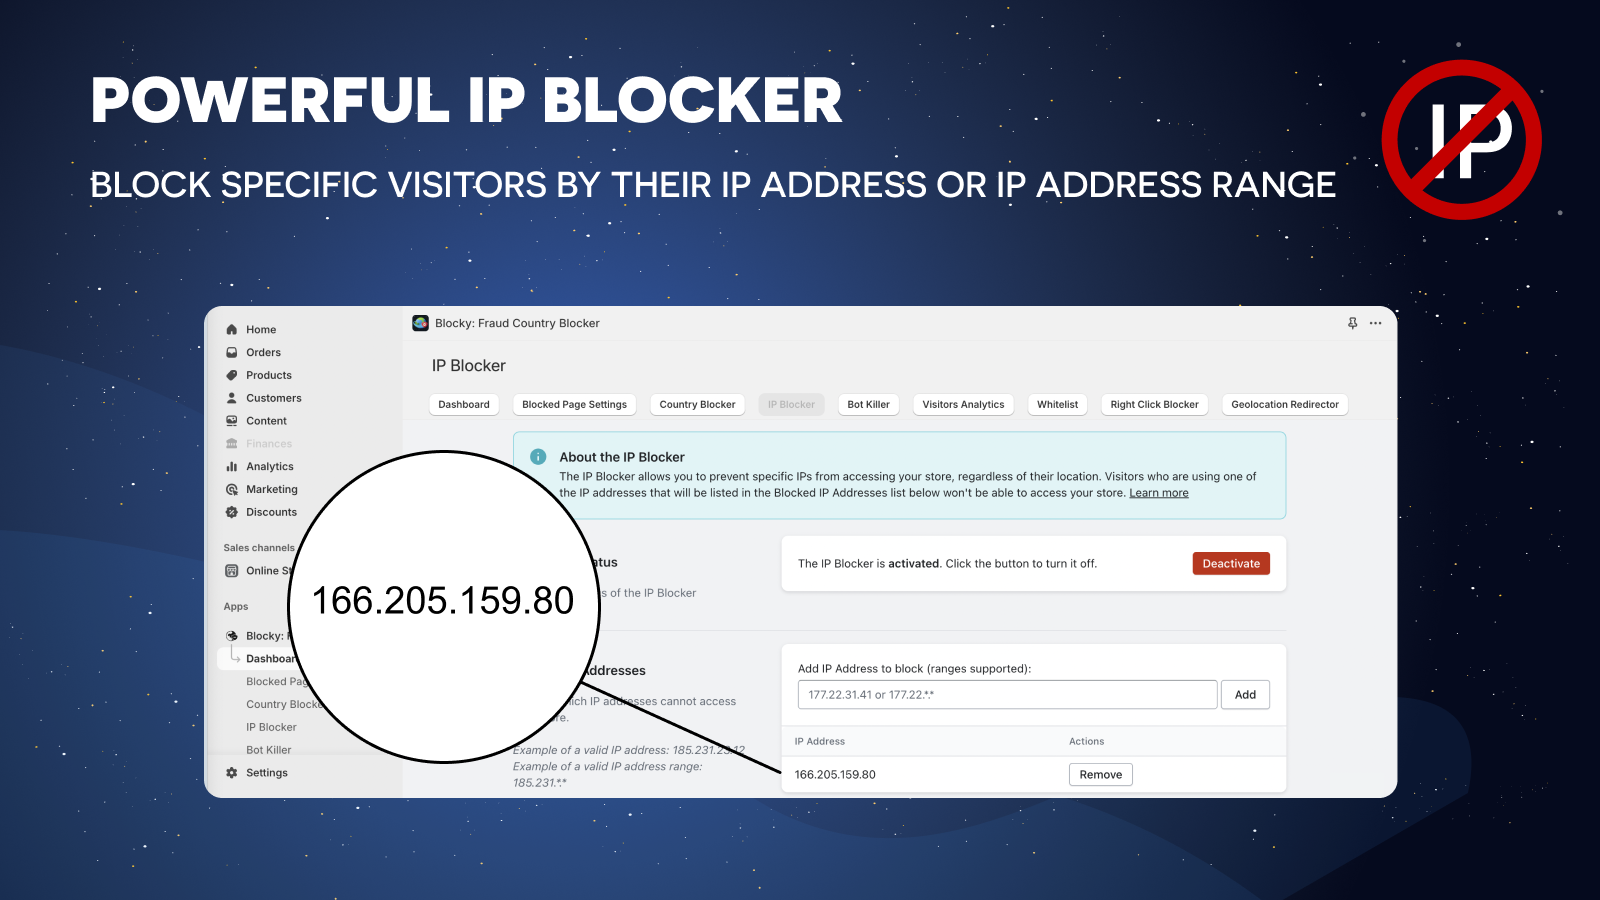 The IP Address blocker feature: Block customers by their IP